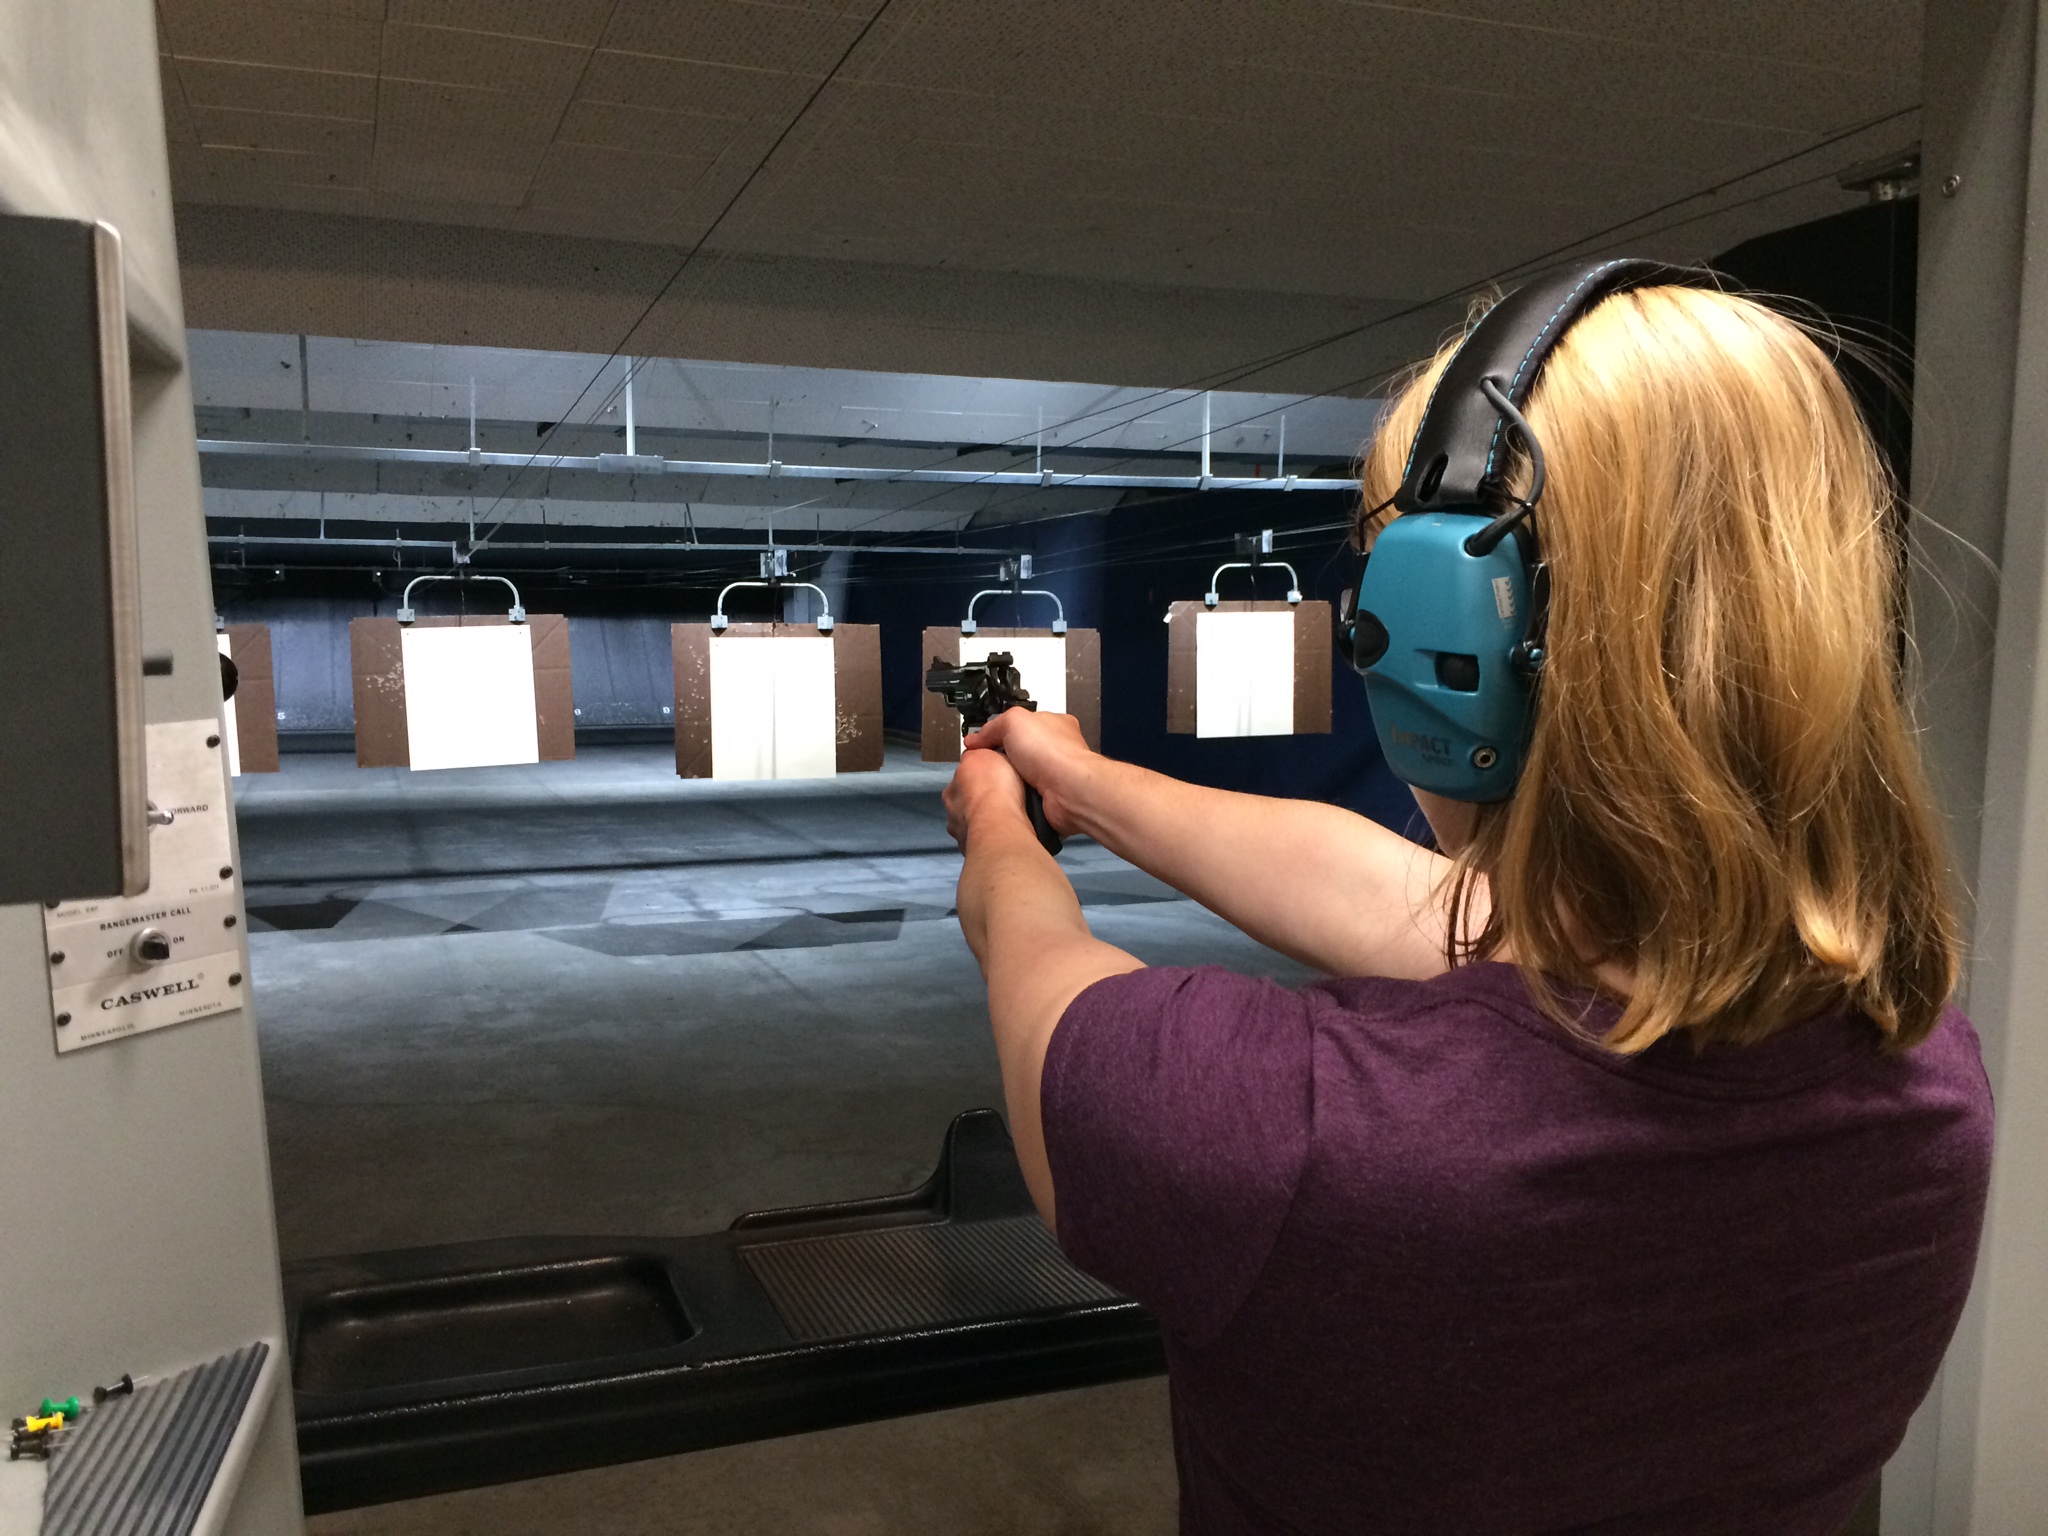 Participant Andrea Turner practices dry firing her pistol at the women’s pistol clinic, a four-week course offered by the Sitka Sportsmen’s Association. (Photo by Katherine Rose/KCAW)